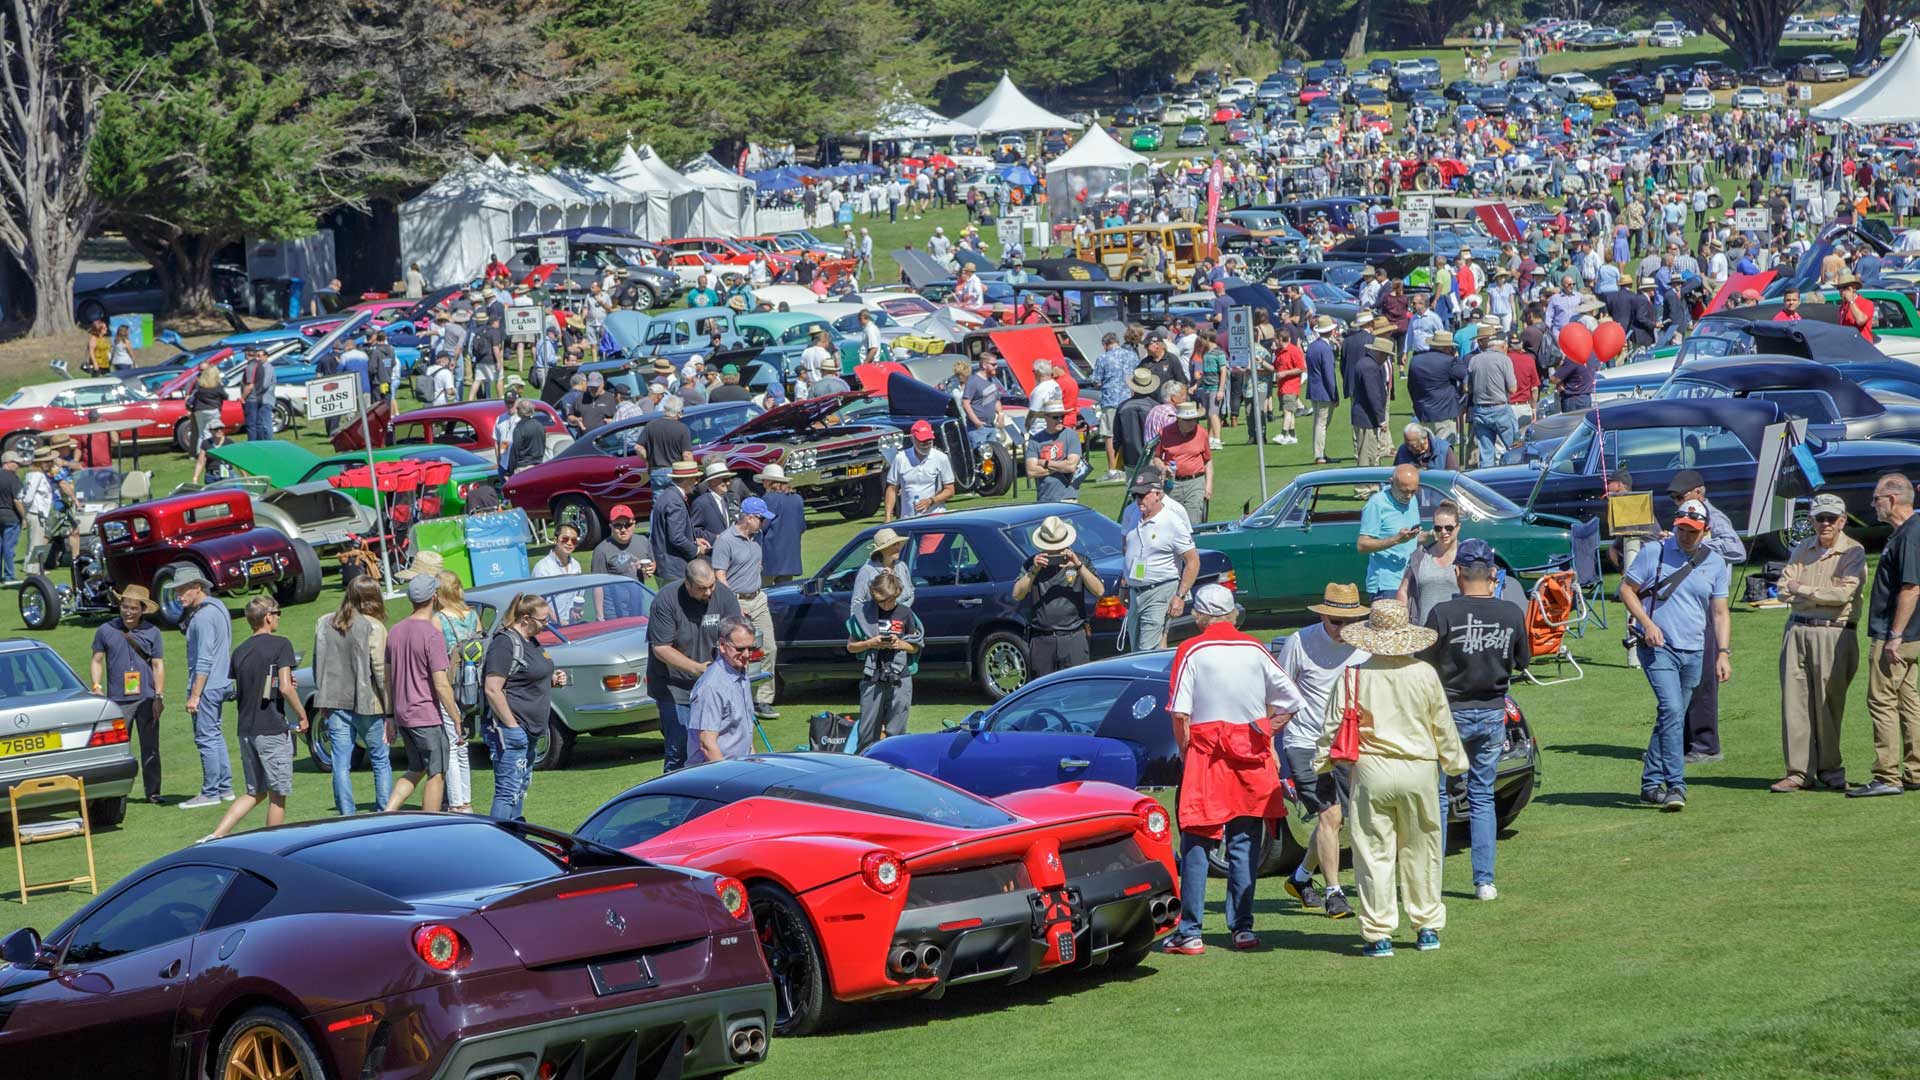 Hillsborough Concours car show is back for 2021 Motoring Research